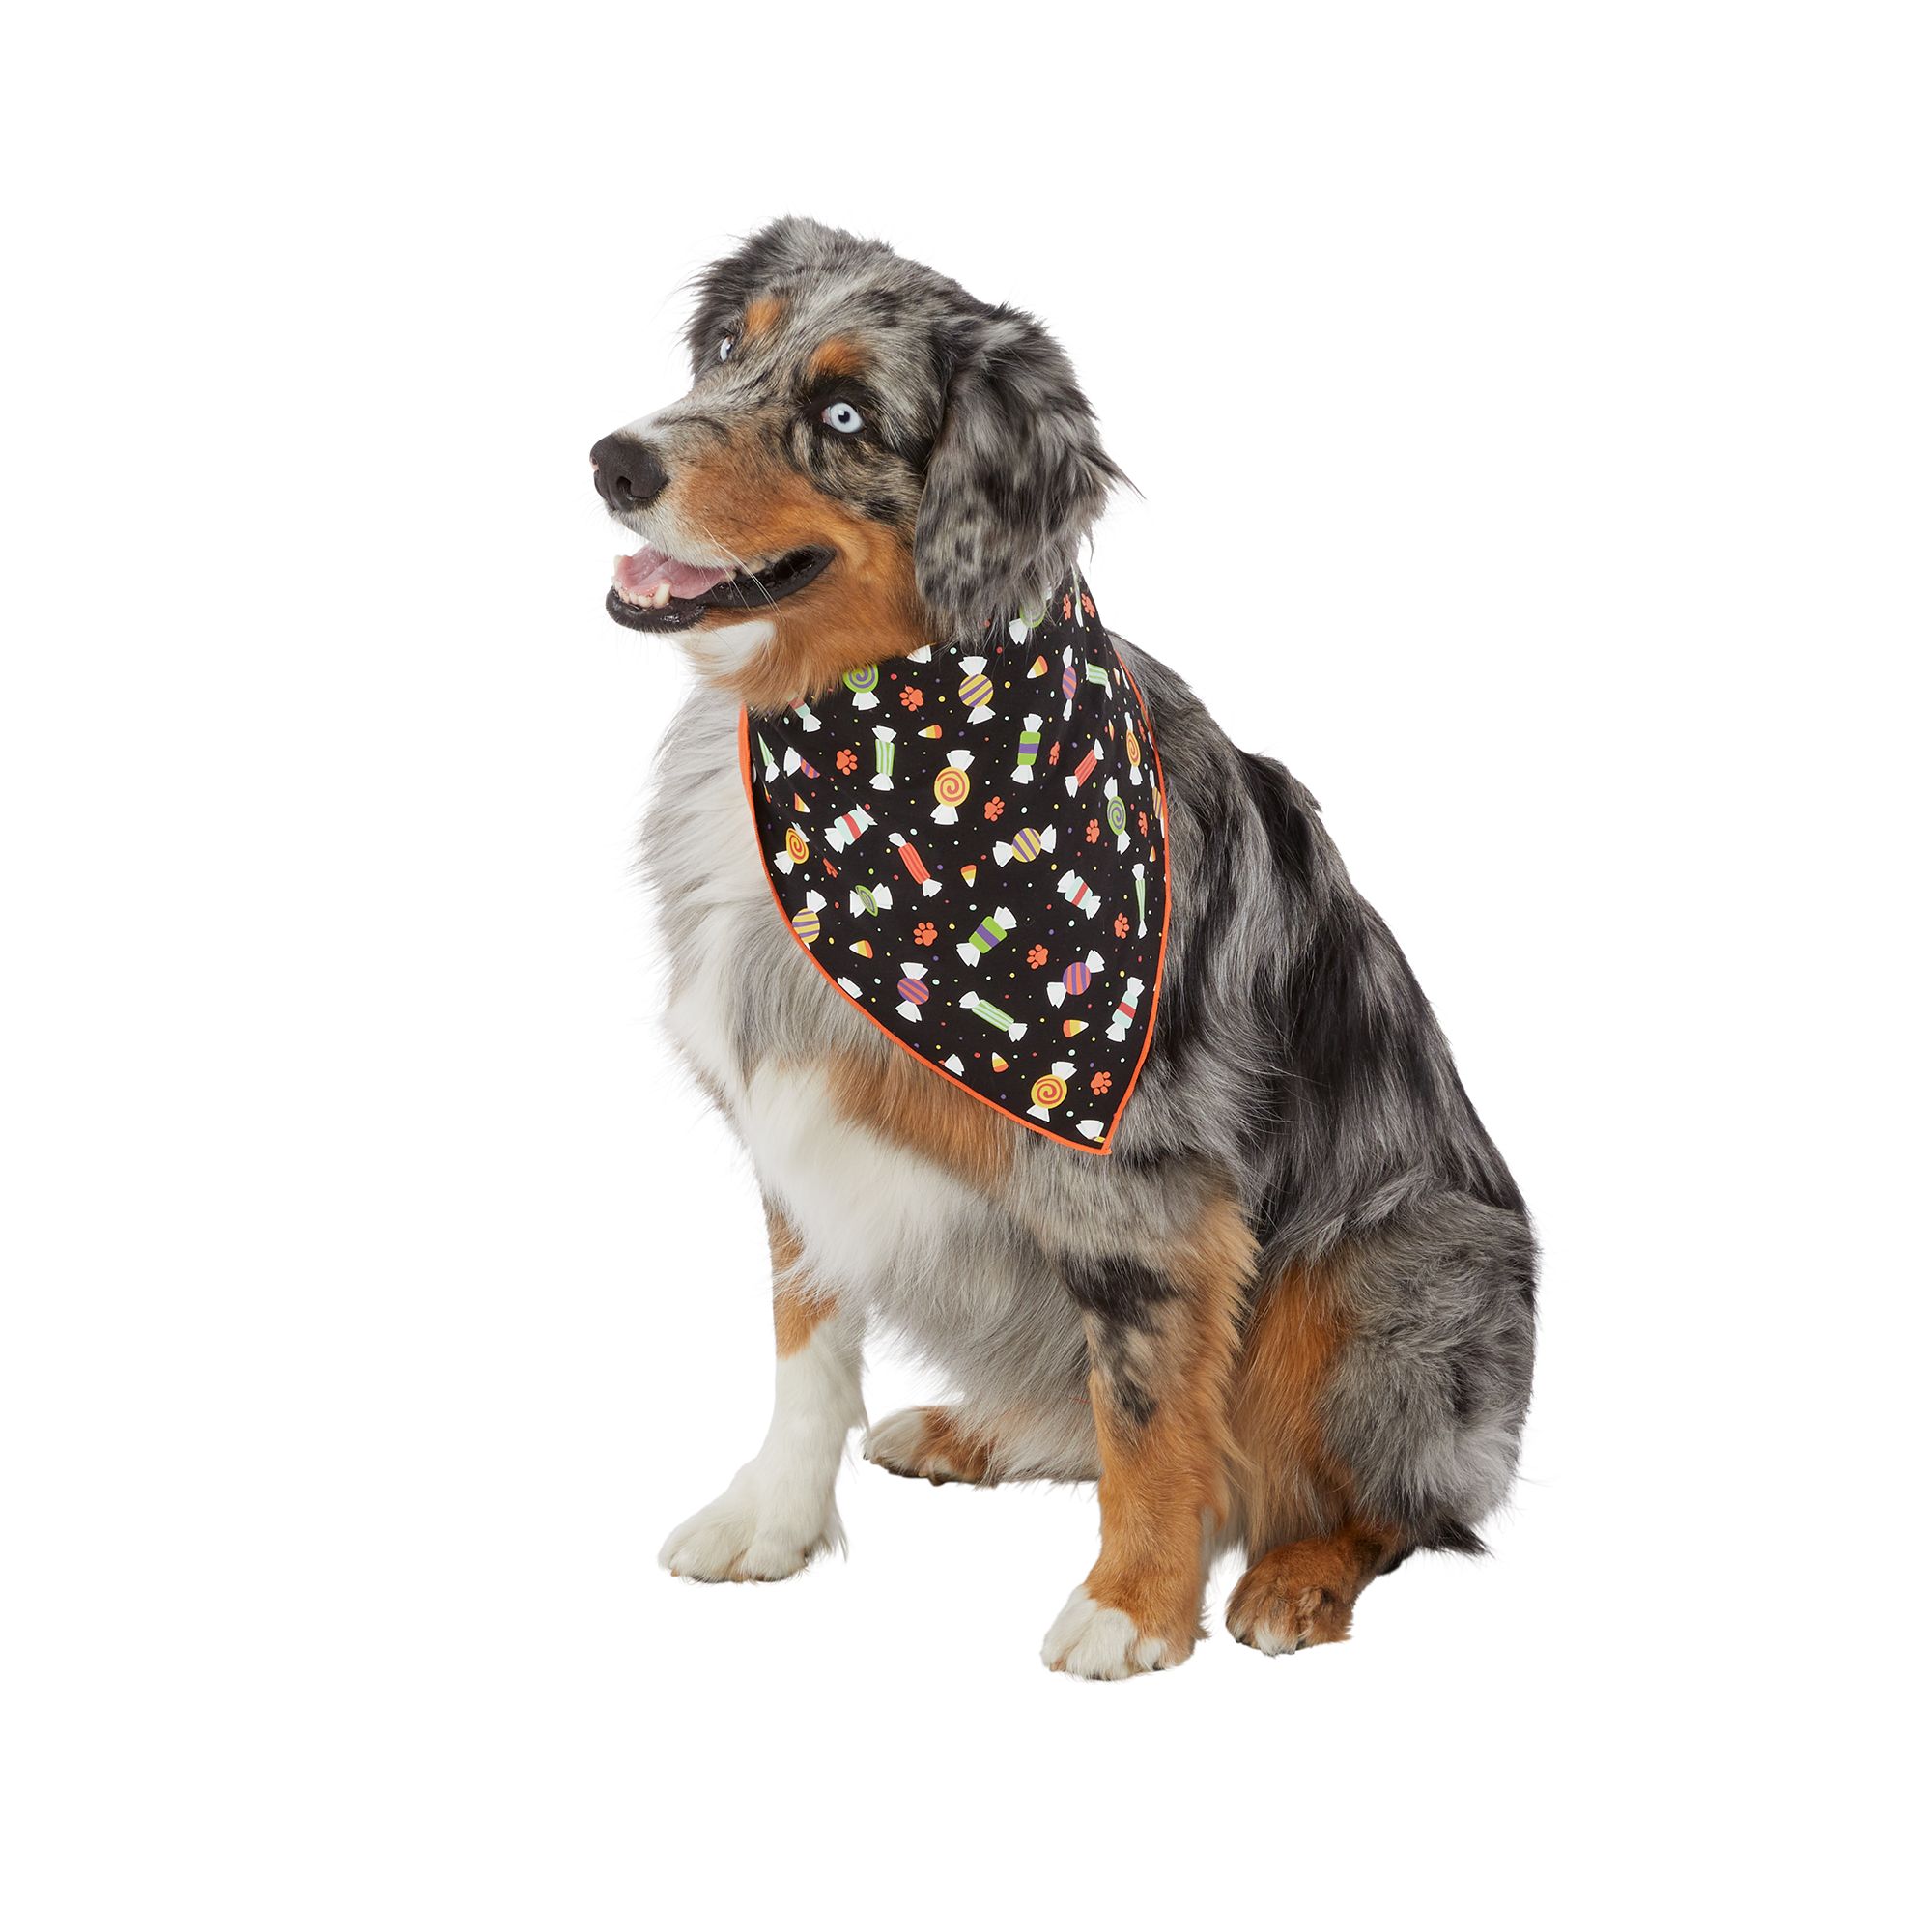 PetSmart Creates Halloween Howls and Tail Wags with Frightfully